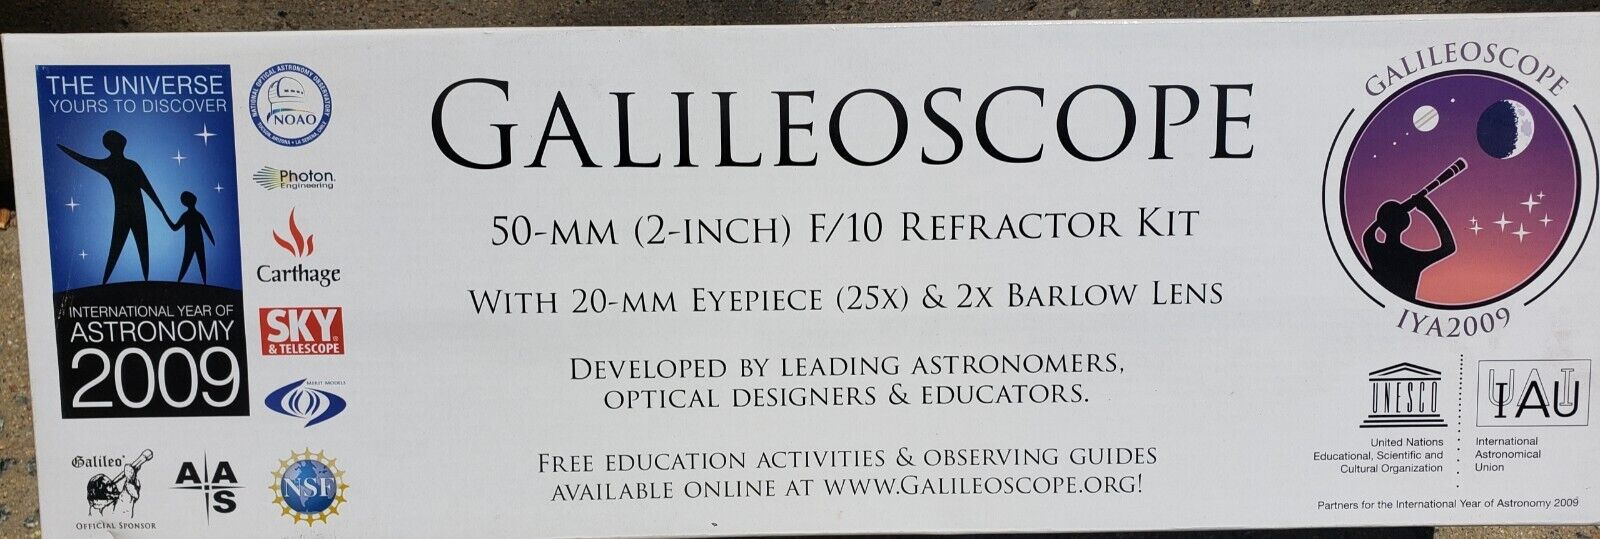 Galileoscope 50-mm 2 Inch F/10 Refractor Kit EasyAssembly New in Box